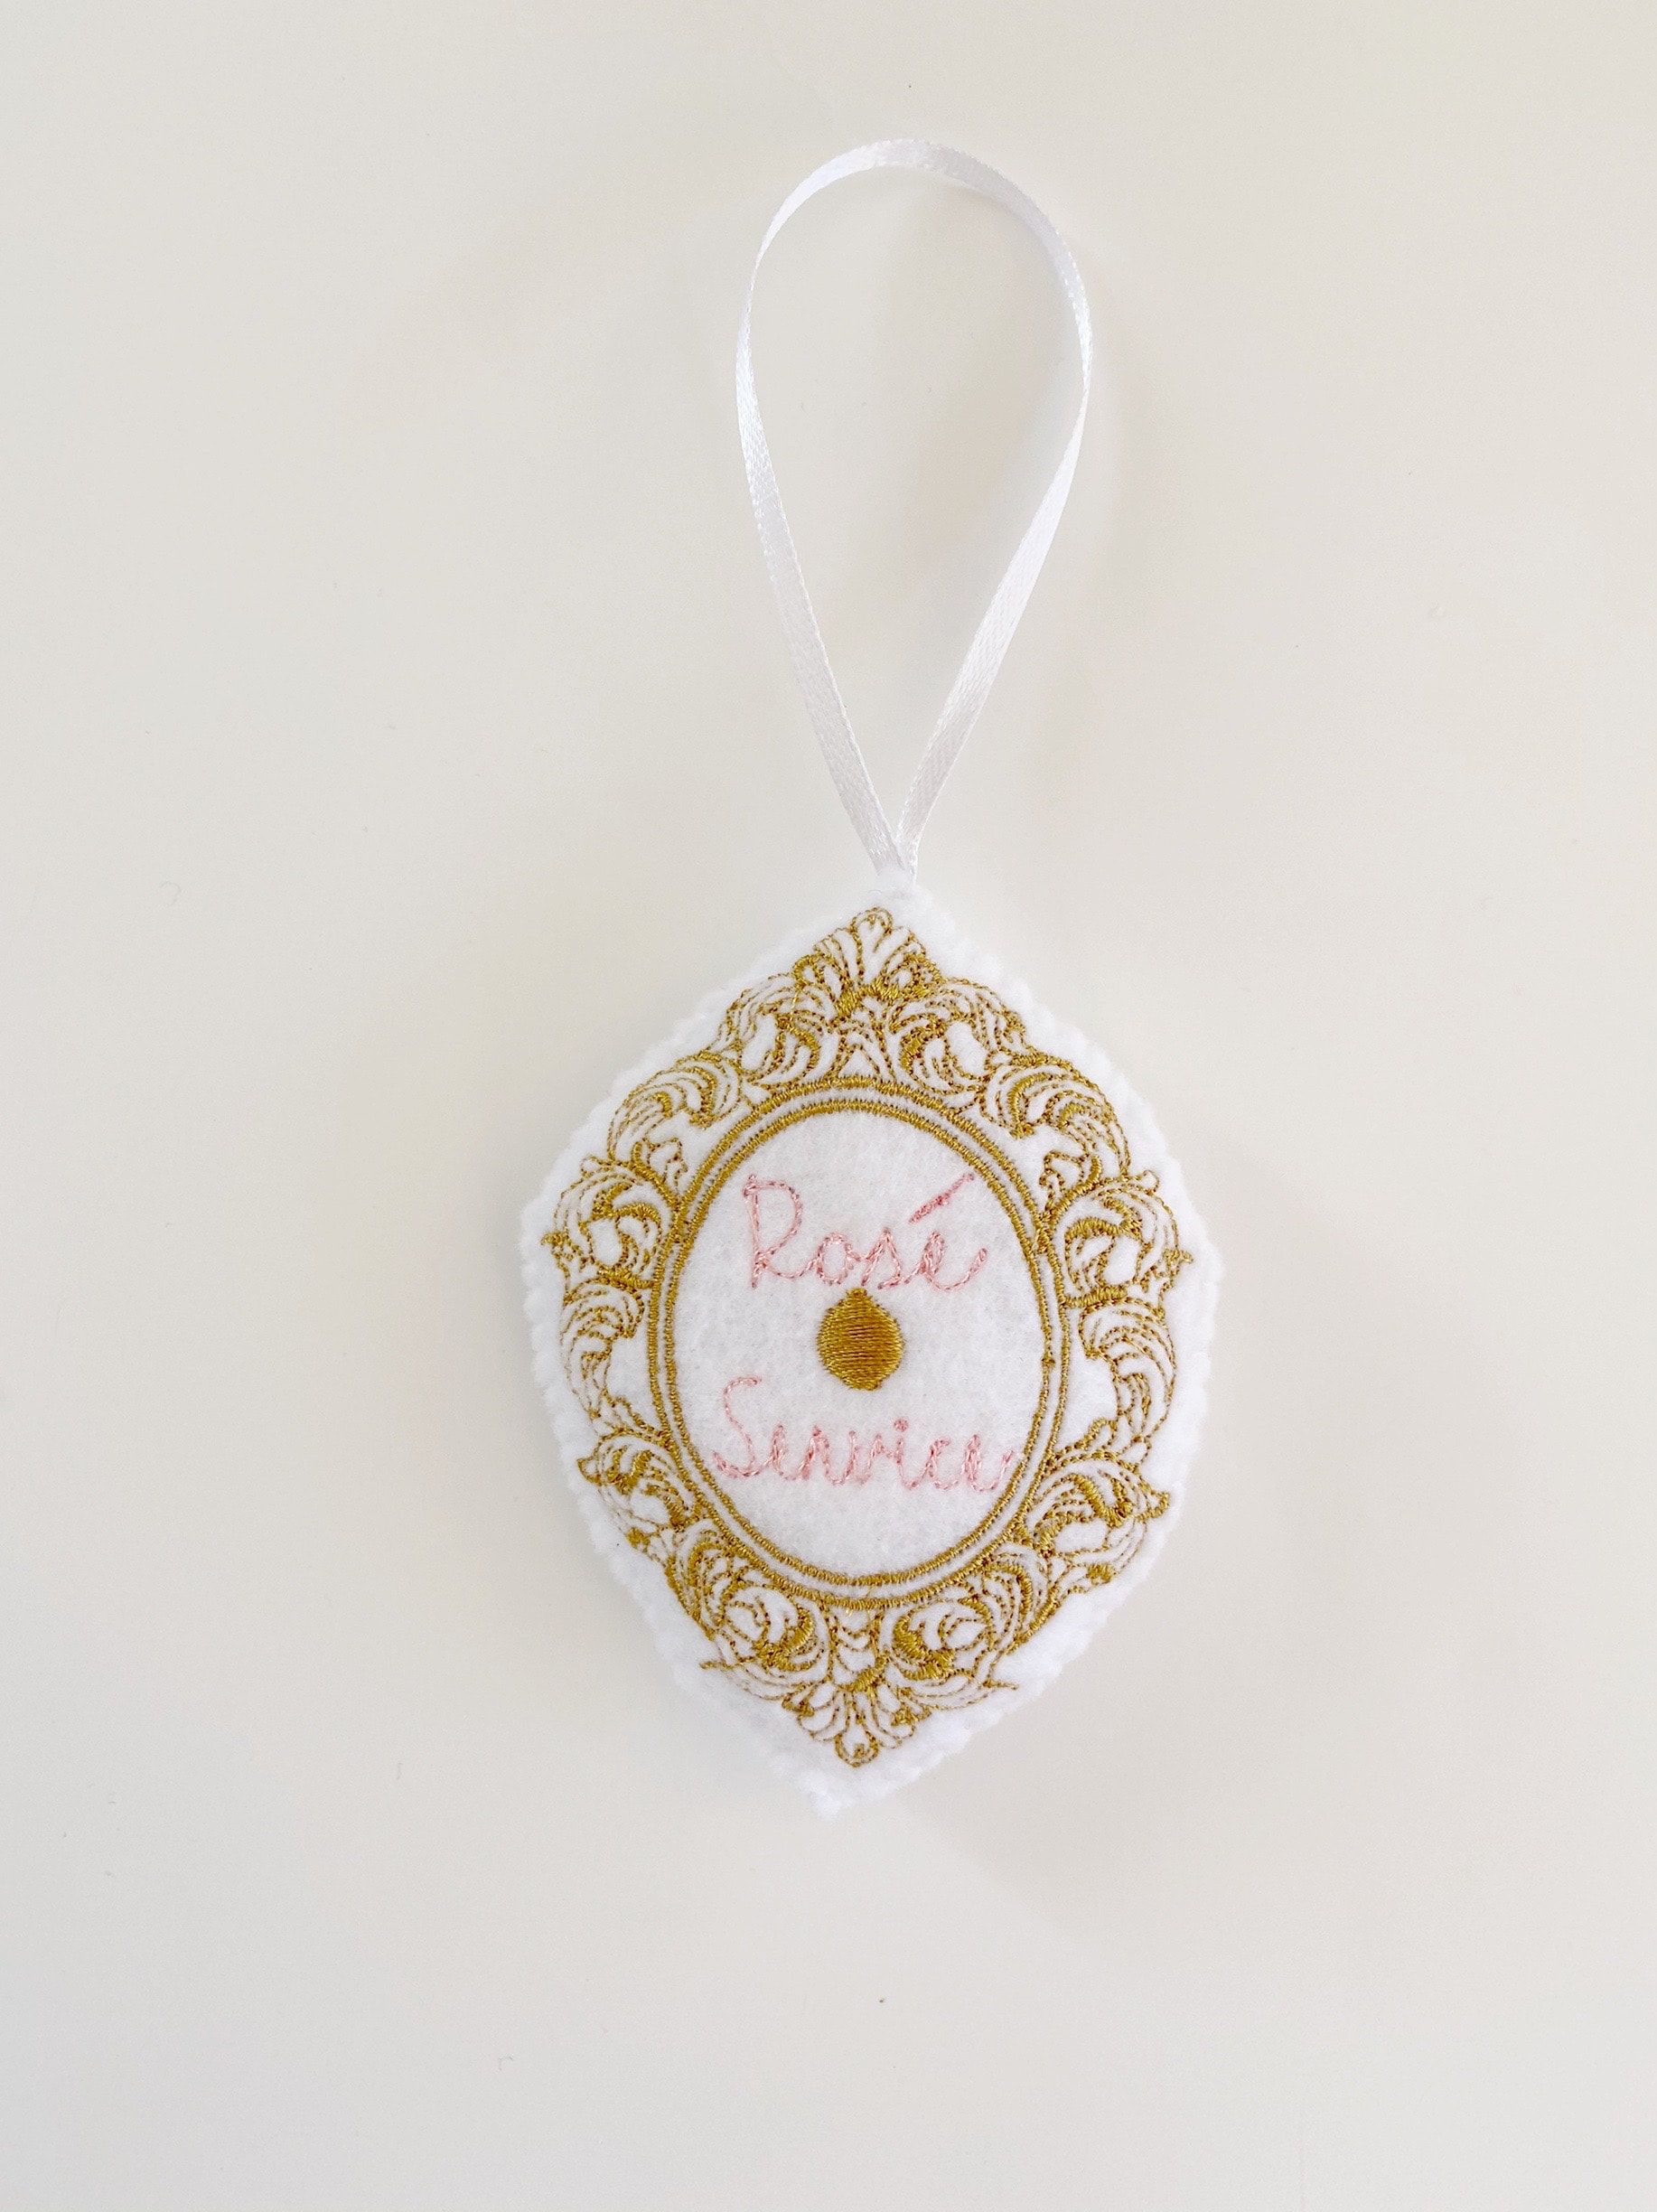 Bauble Rose Service | All The Finery